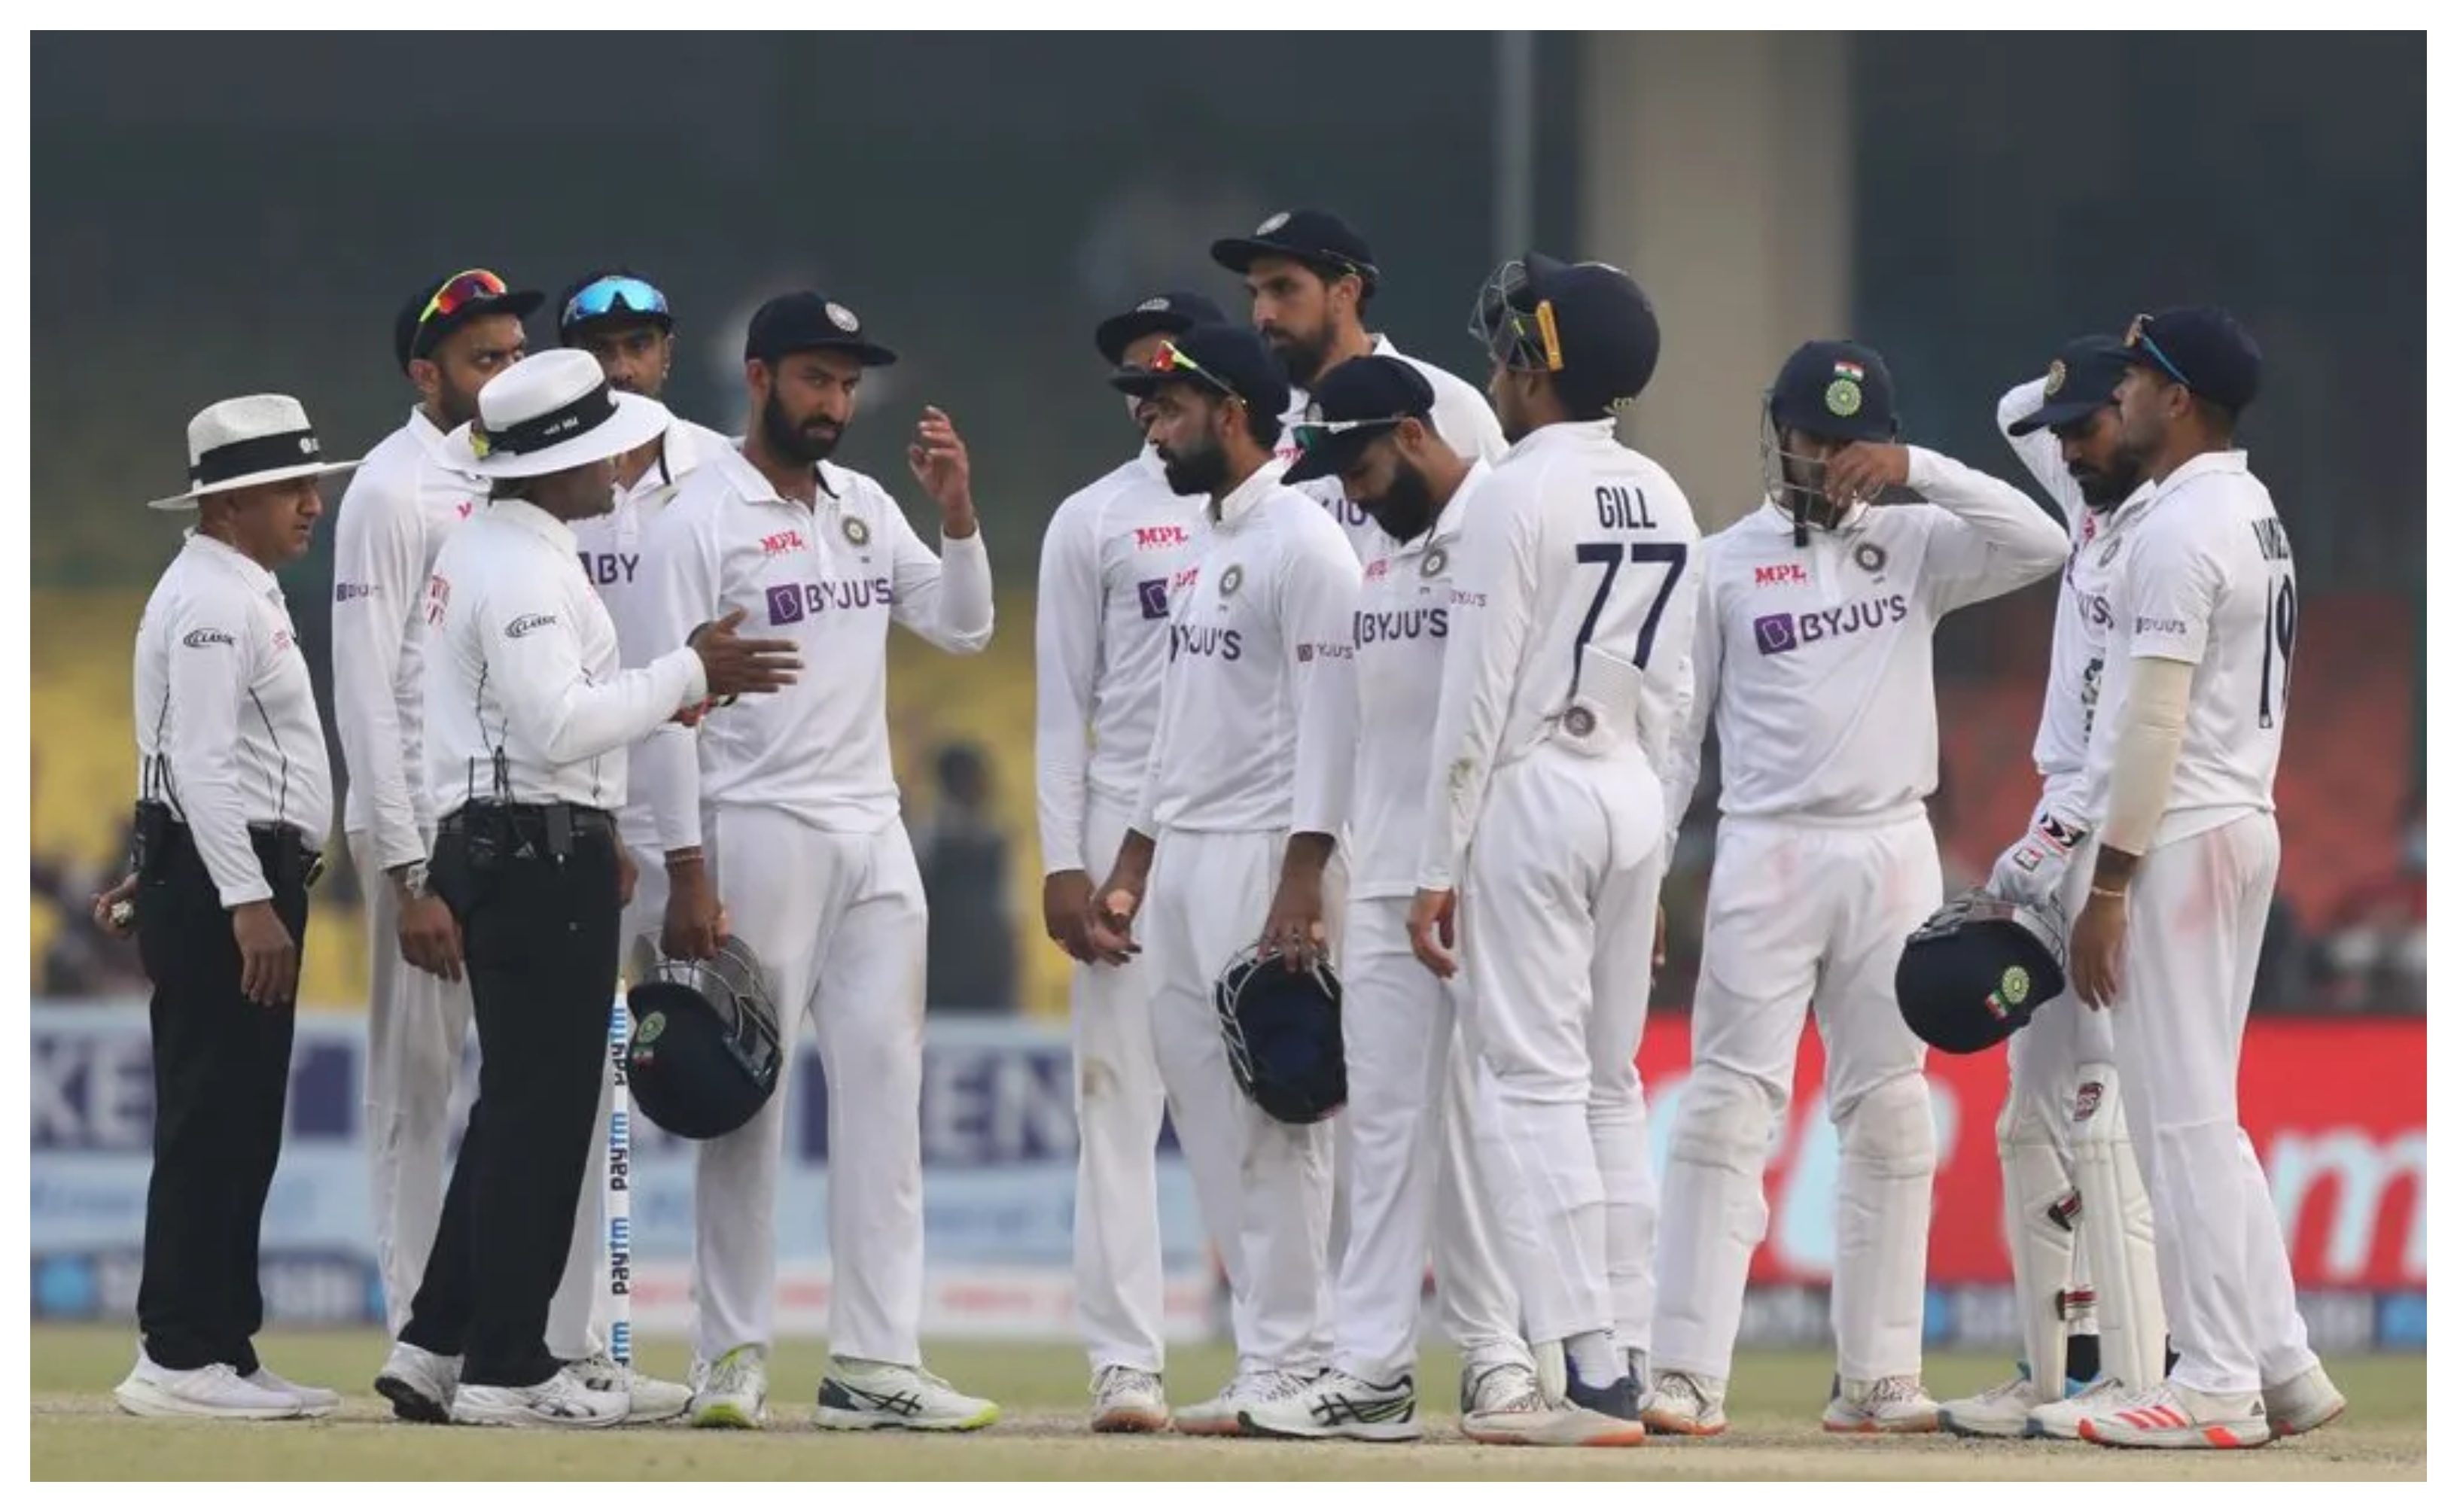 Team India ended the Test one wicket away from victory | BCCI